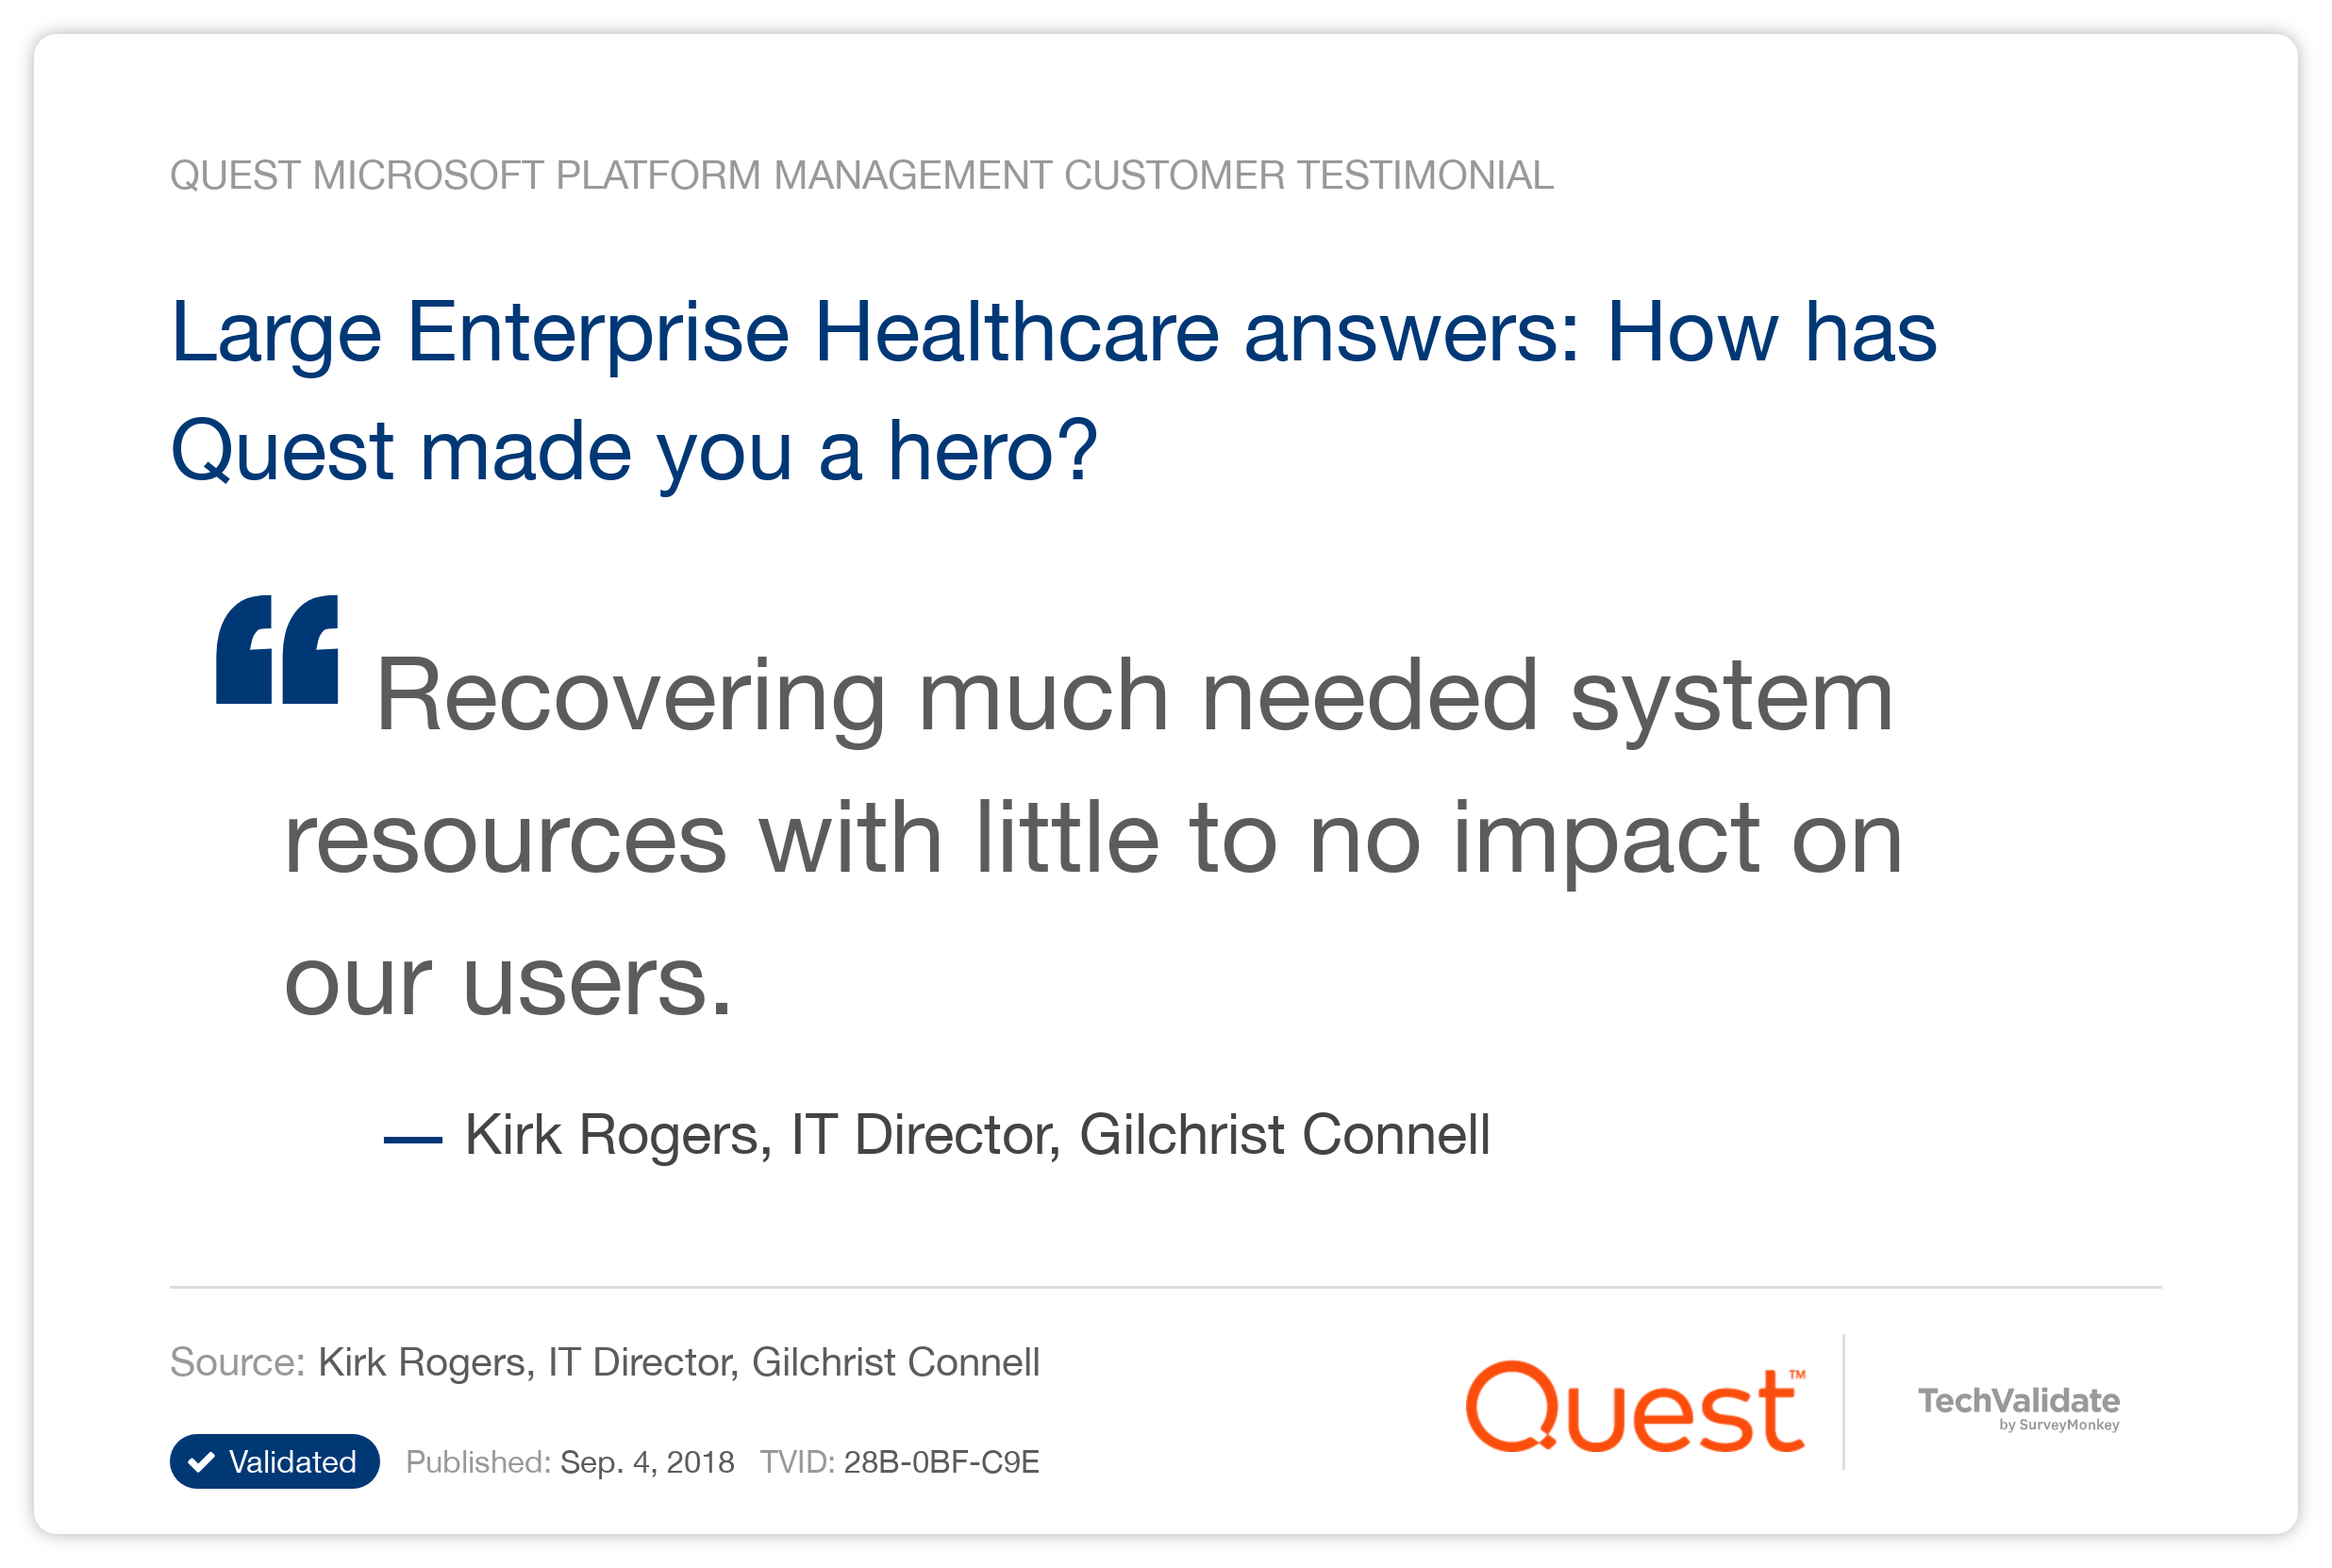 Large Enterprise Healthcare answers: How has Quest made you a hero?